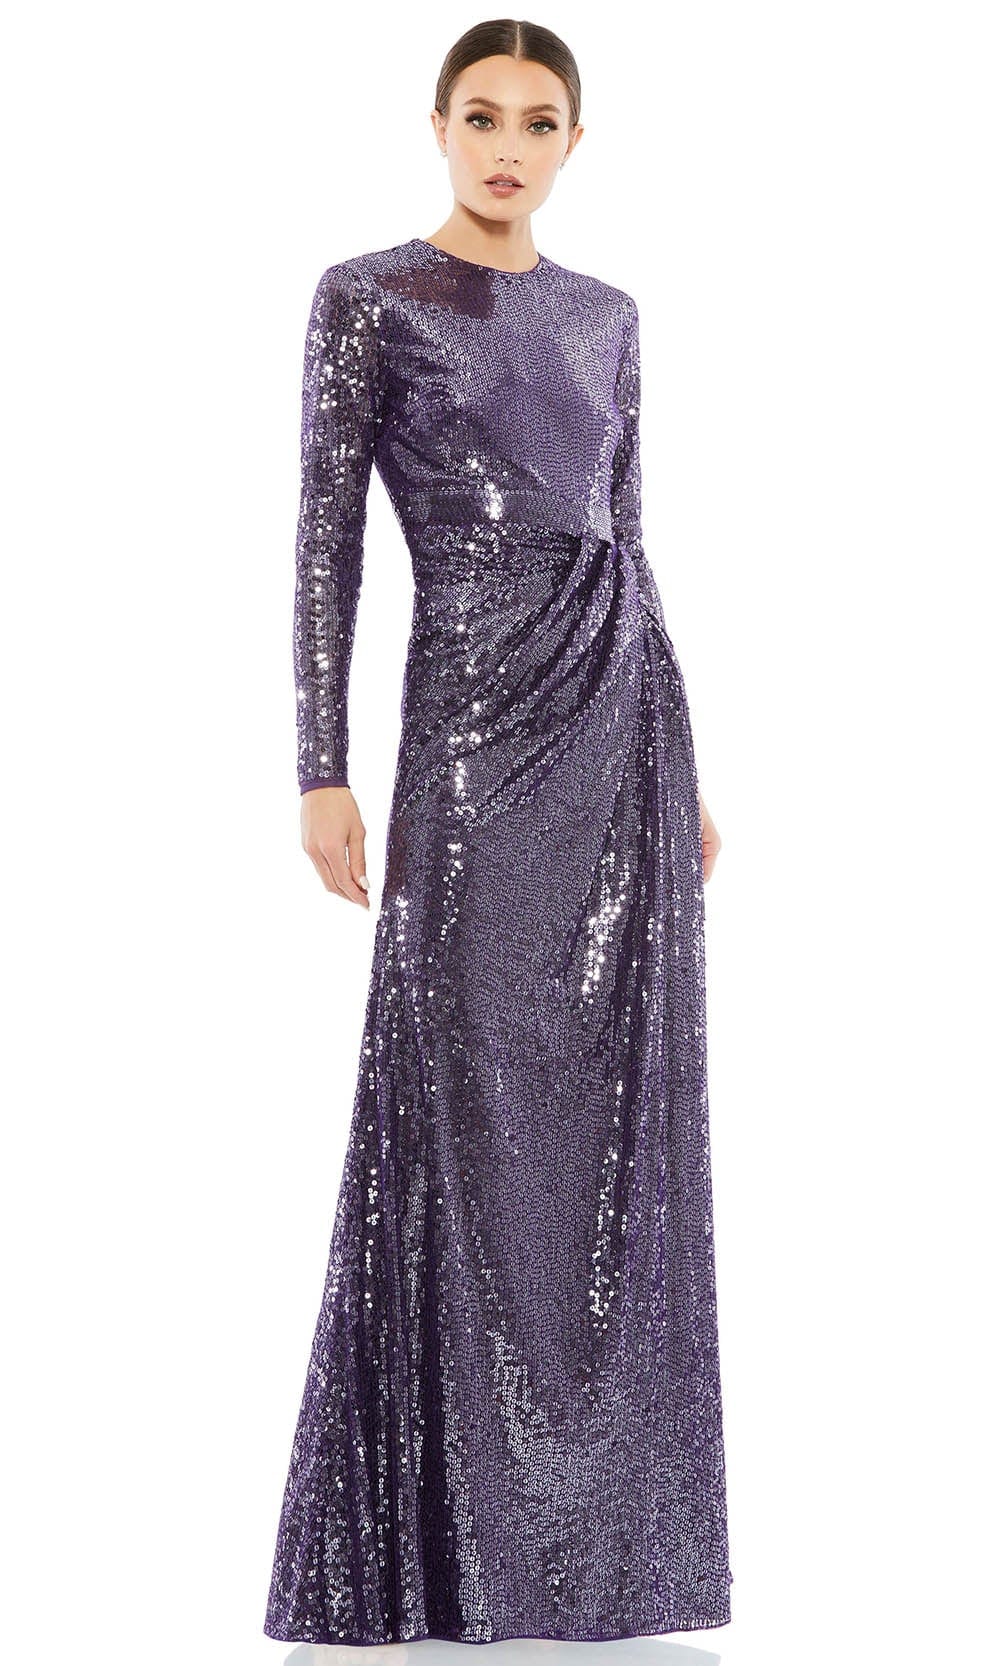 Image of Mac Duggal 10824 - Draped Sequin Evening Gown | Couture Candy